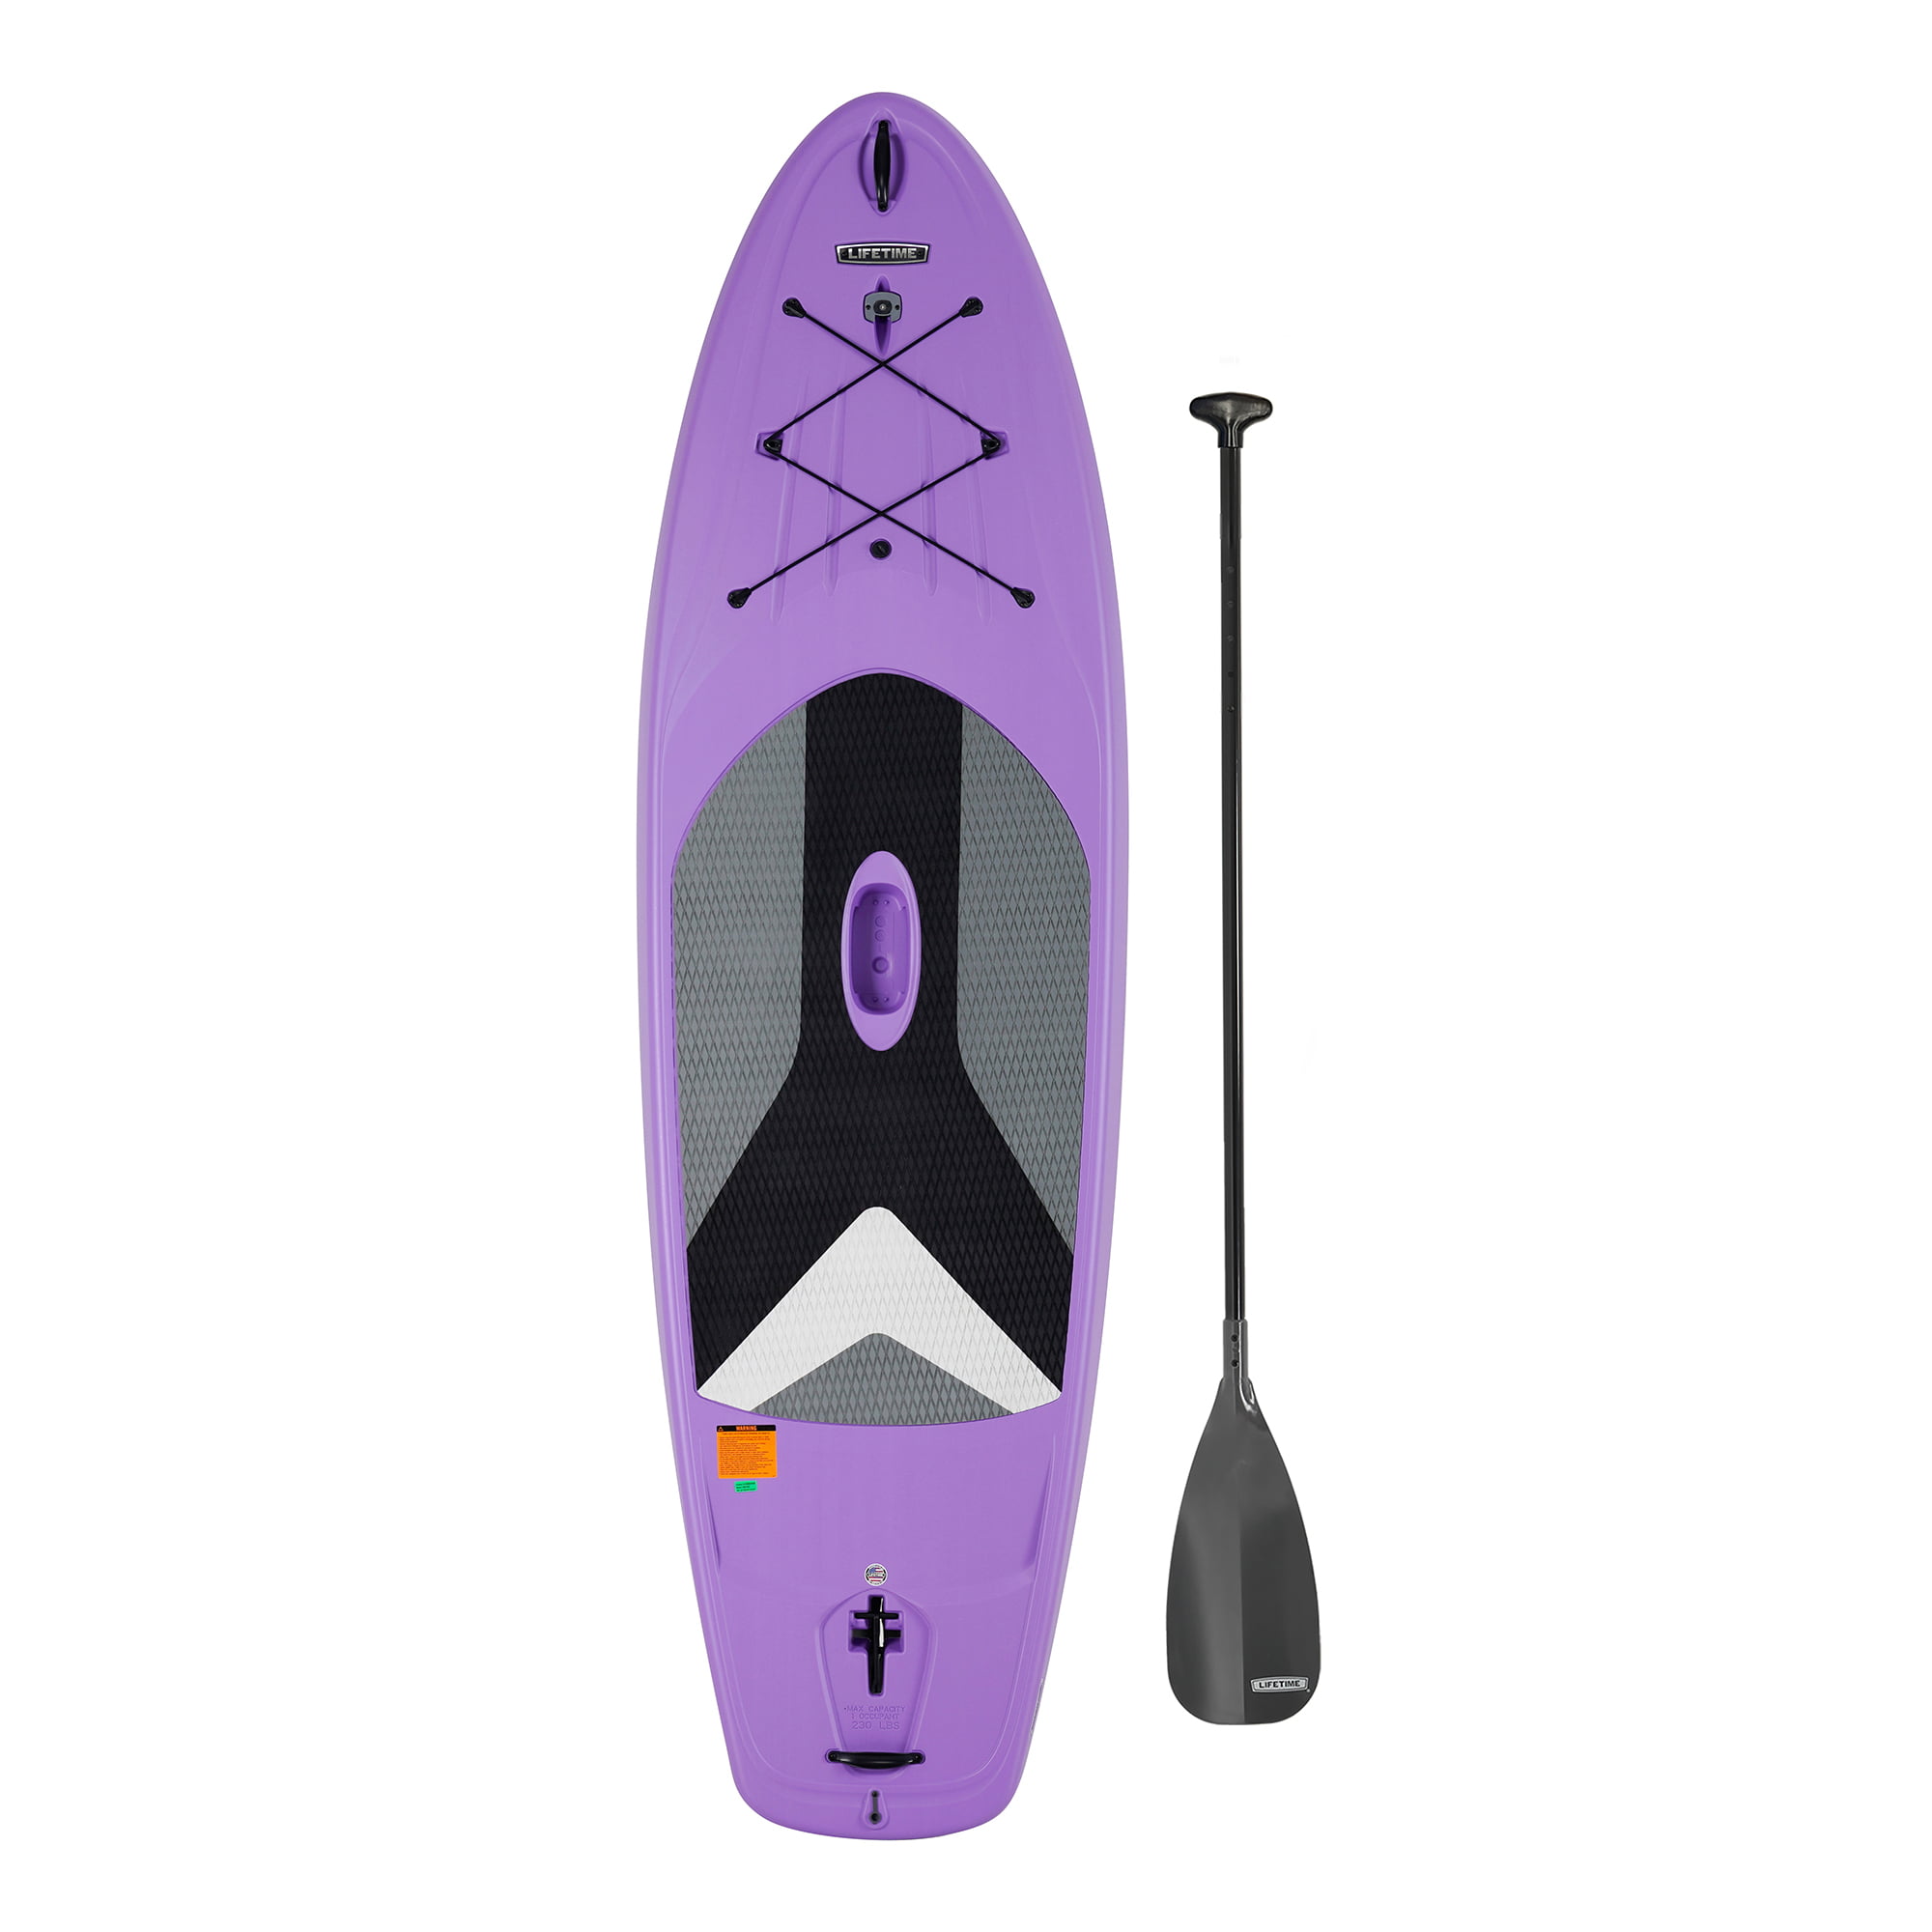 Customizable Performance EVA Deck Grip for Details about   Surf Paddle Board   Traction Pad 